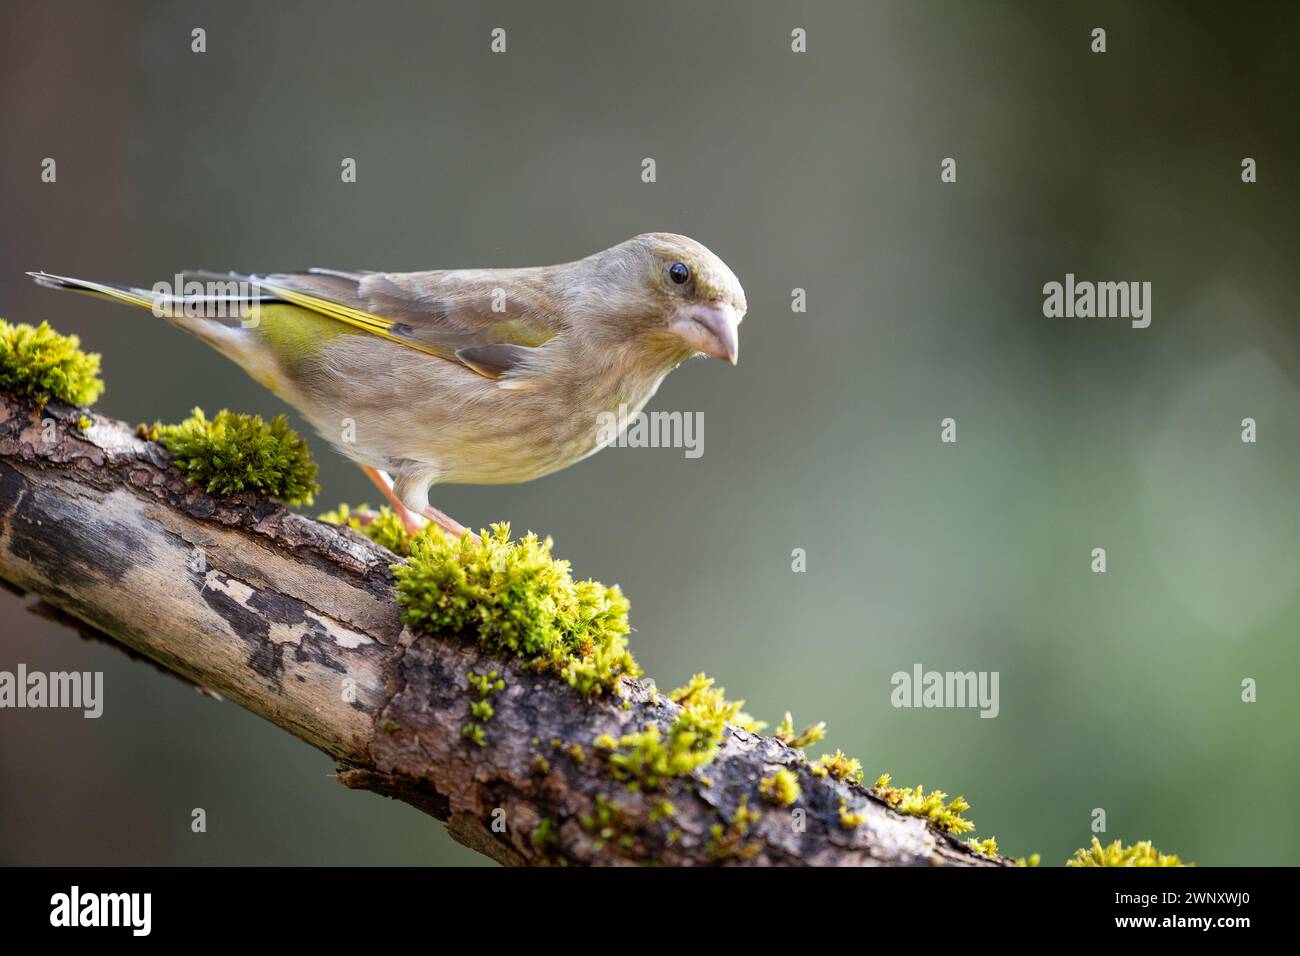 Adult female greenfinch (Chloris chloris) perched on a mossy branch - Yorkshire, UK Stock Photo